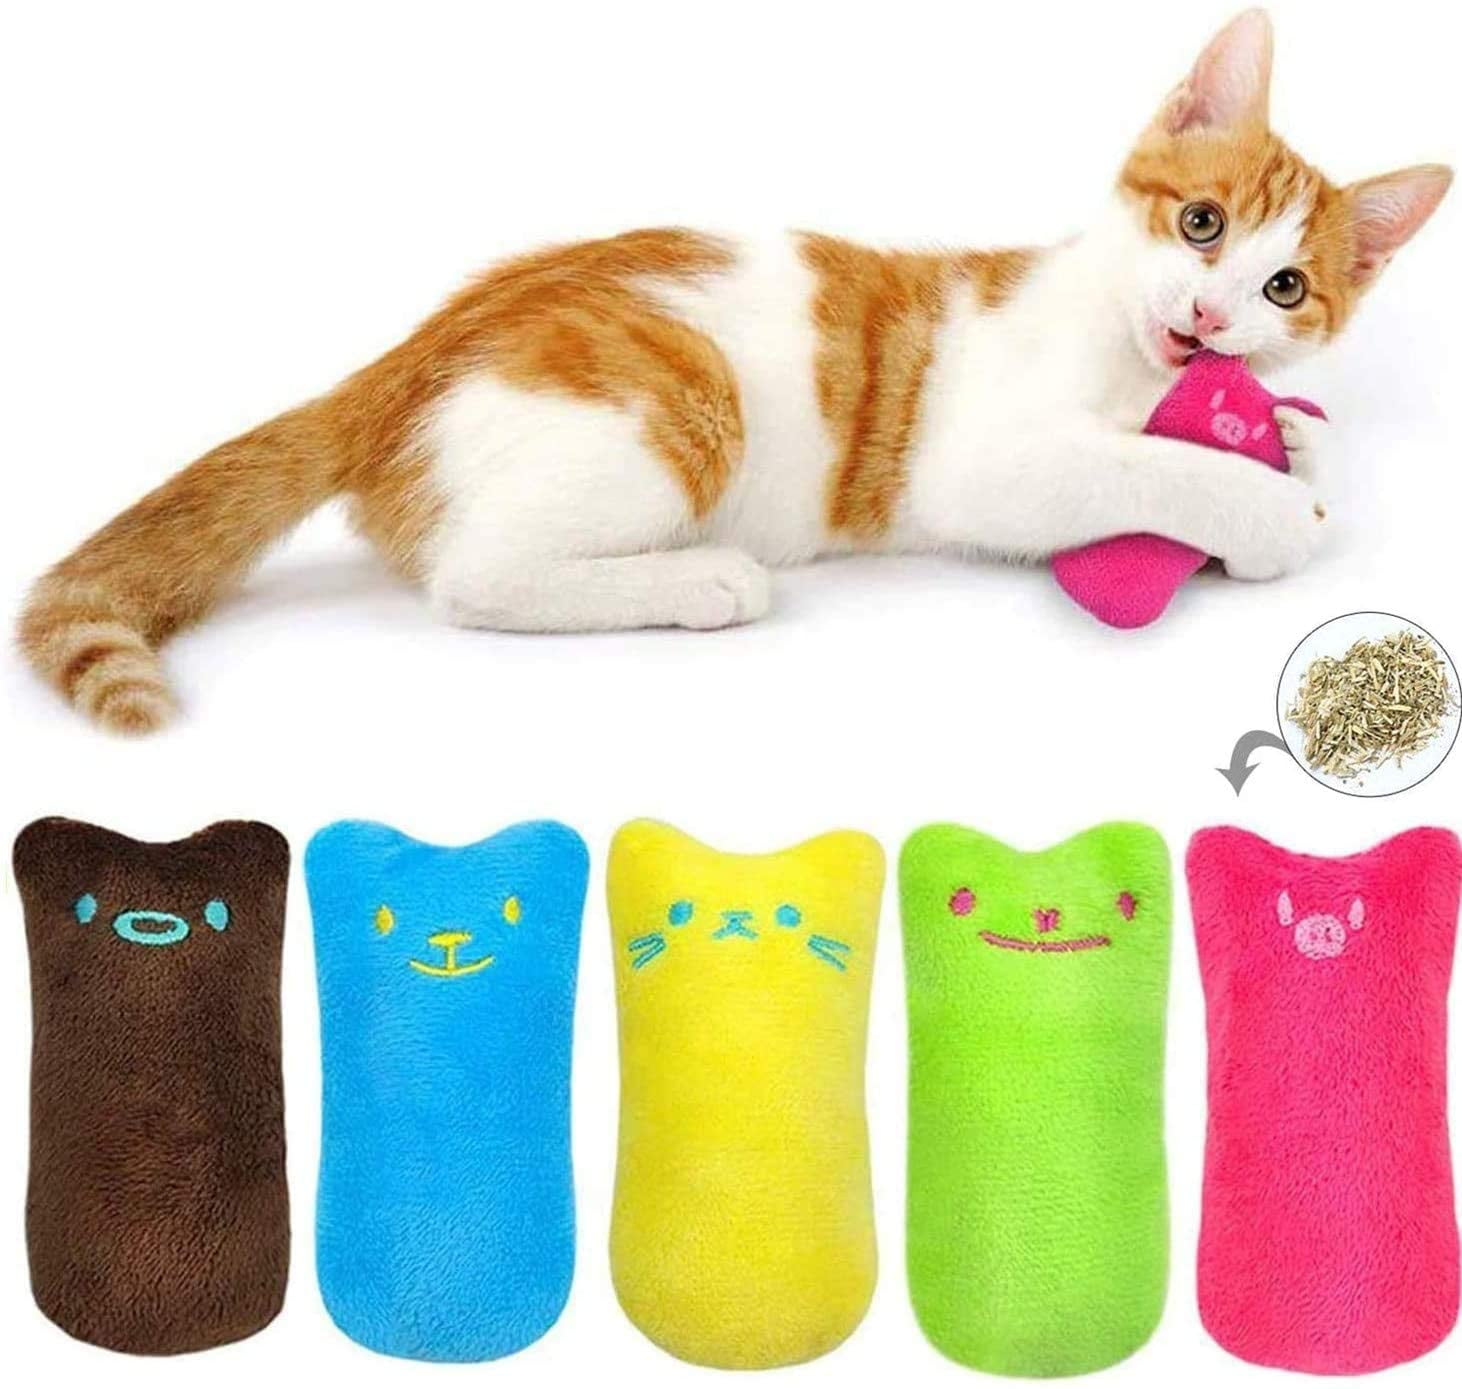 12 Pcs Cat Toys for Indoor Cats Kitten Plush Catnip Toy Cat Teeth Cleaning Toys Interactive Cat Feather Teaser Wand Spring Toy